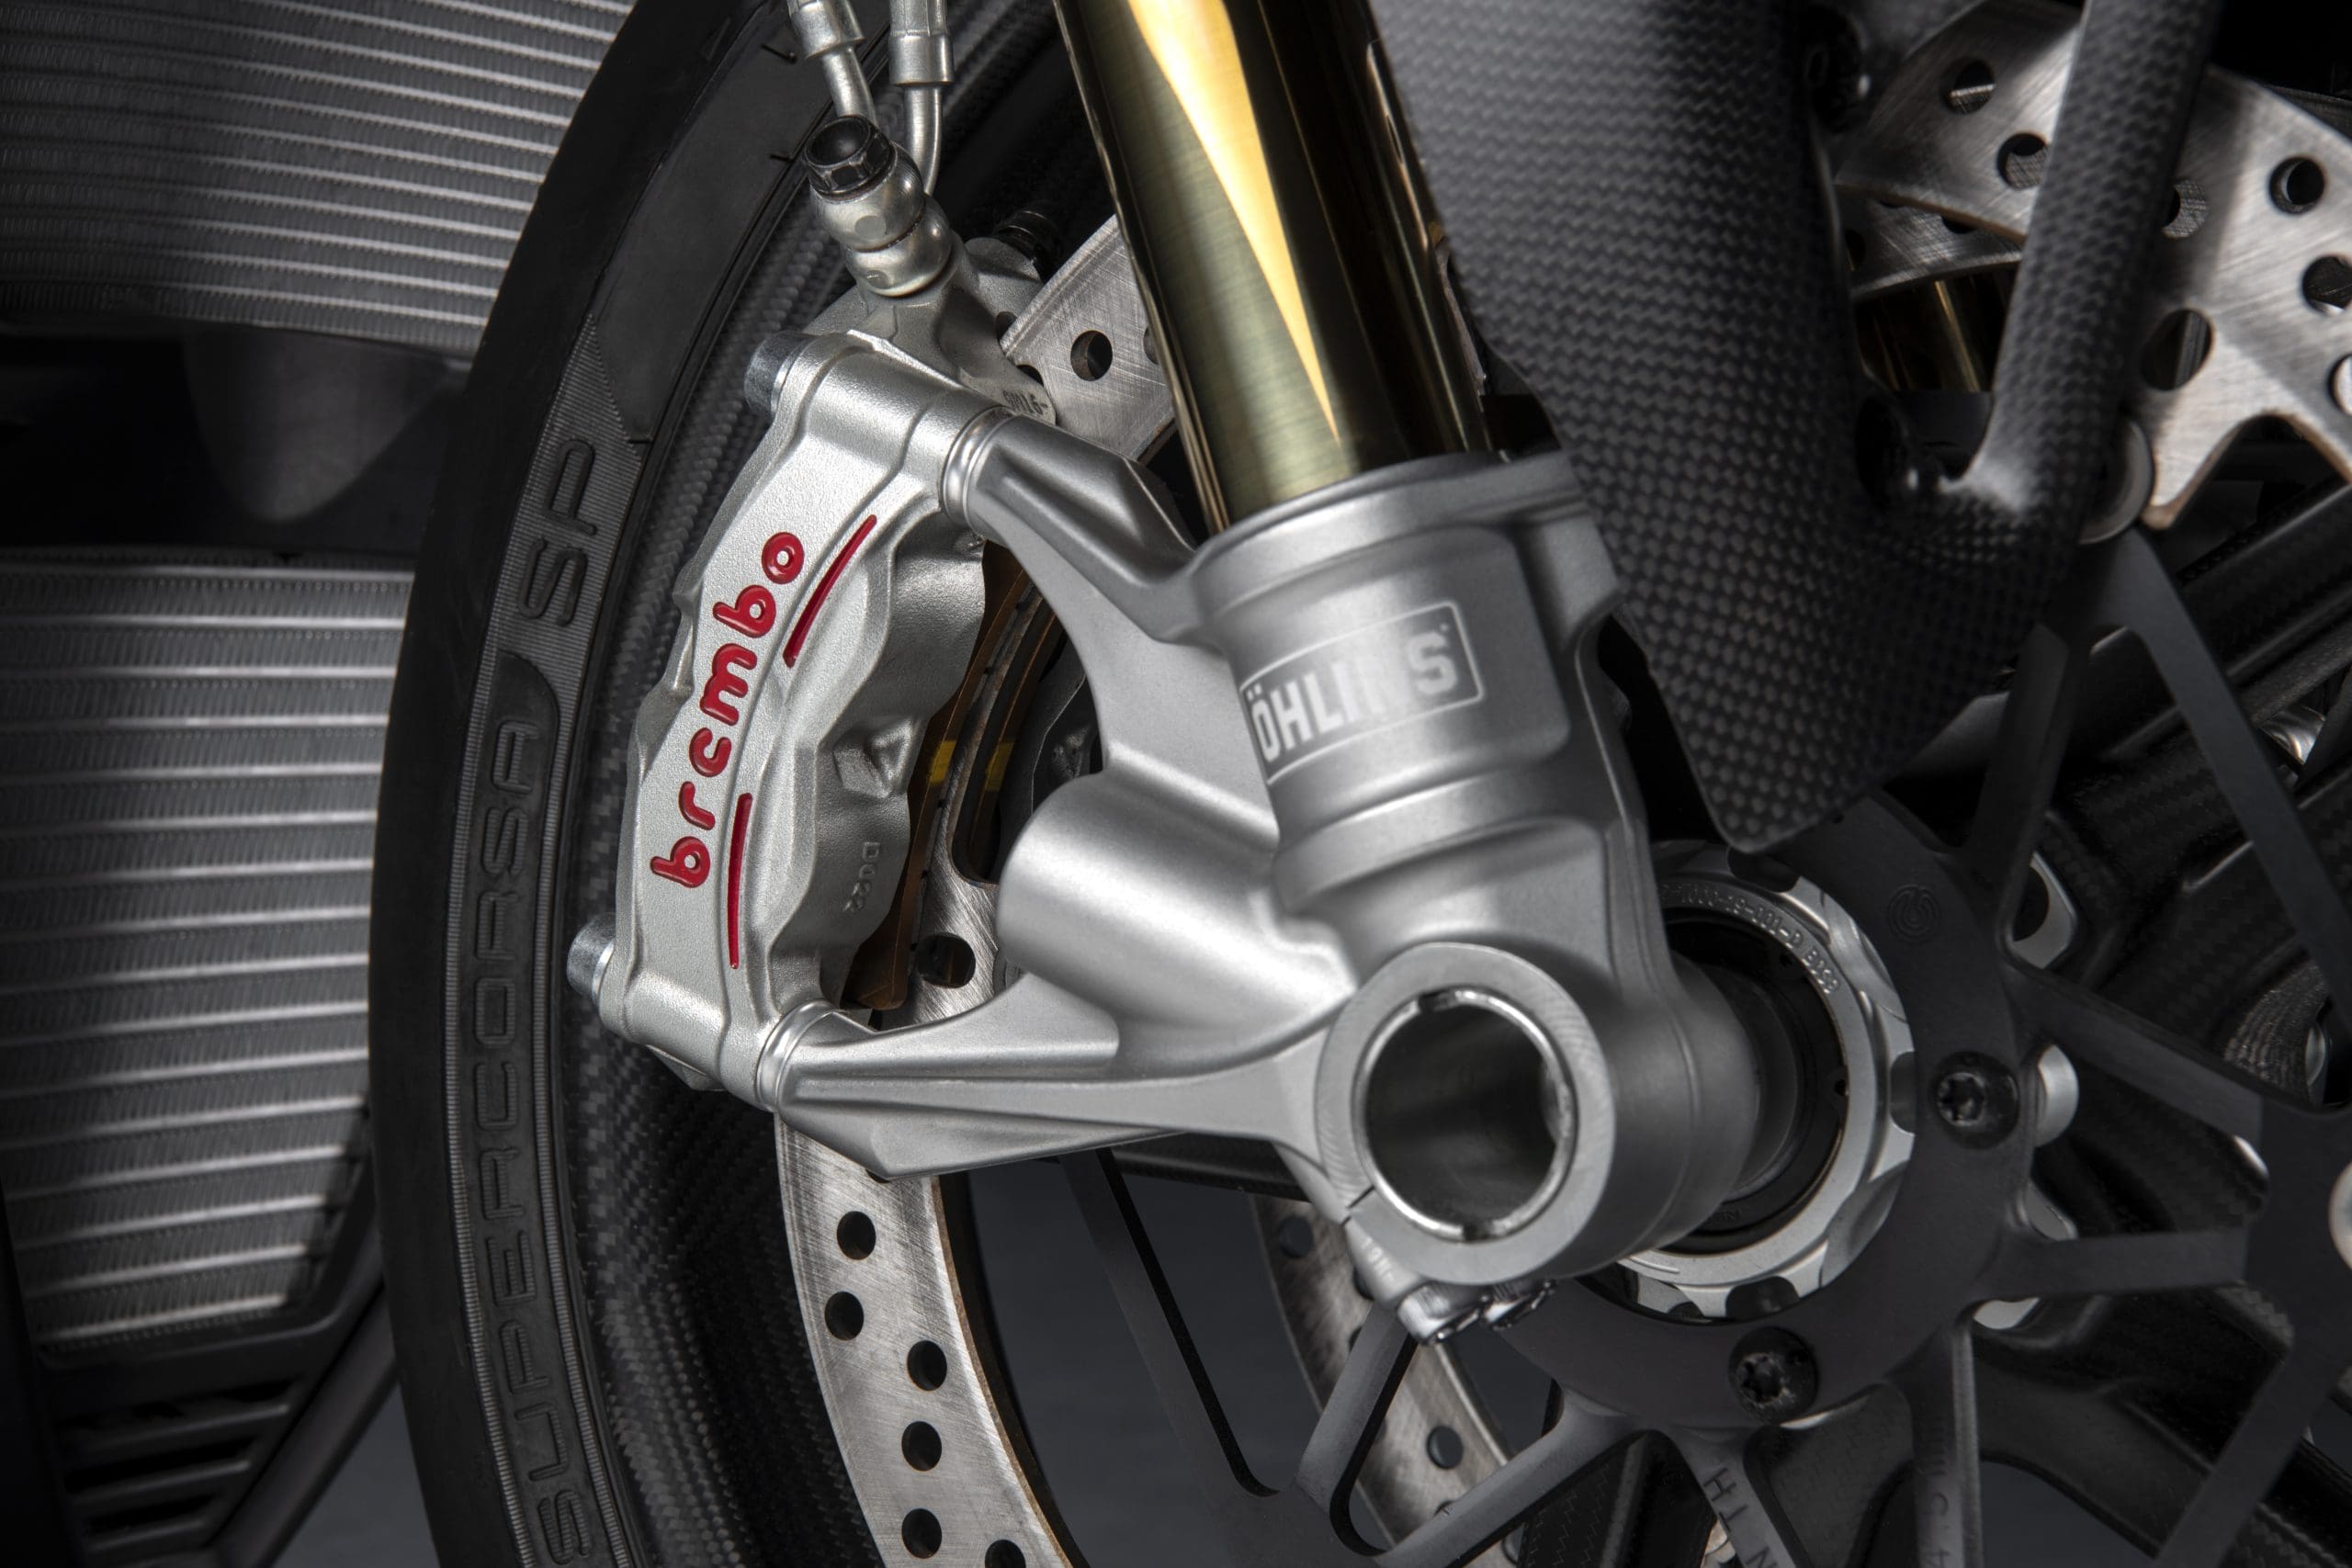 A view of the bike revealed as a part of the ninth episode of the Ducati World Premiere series - the Panigale V4 SP2